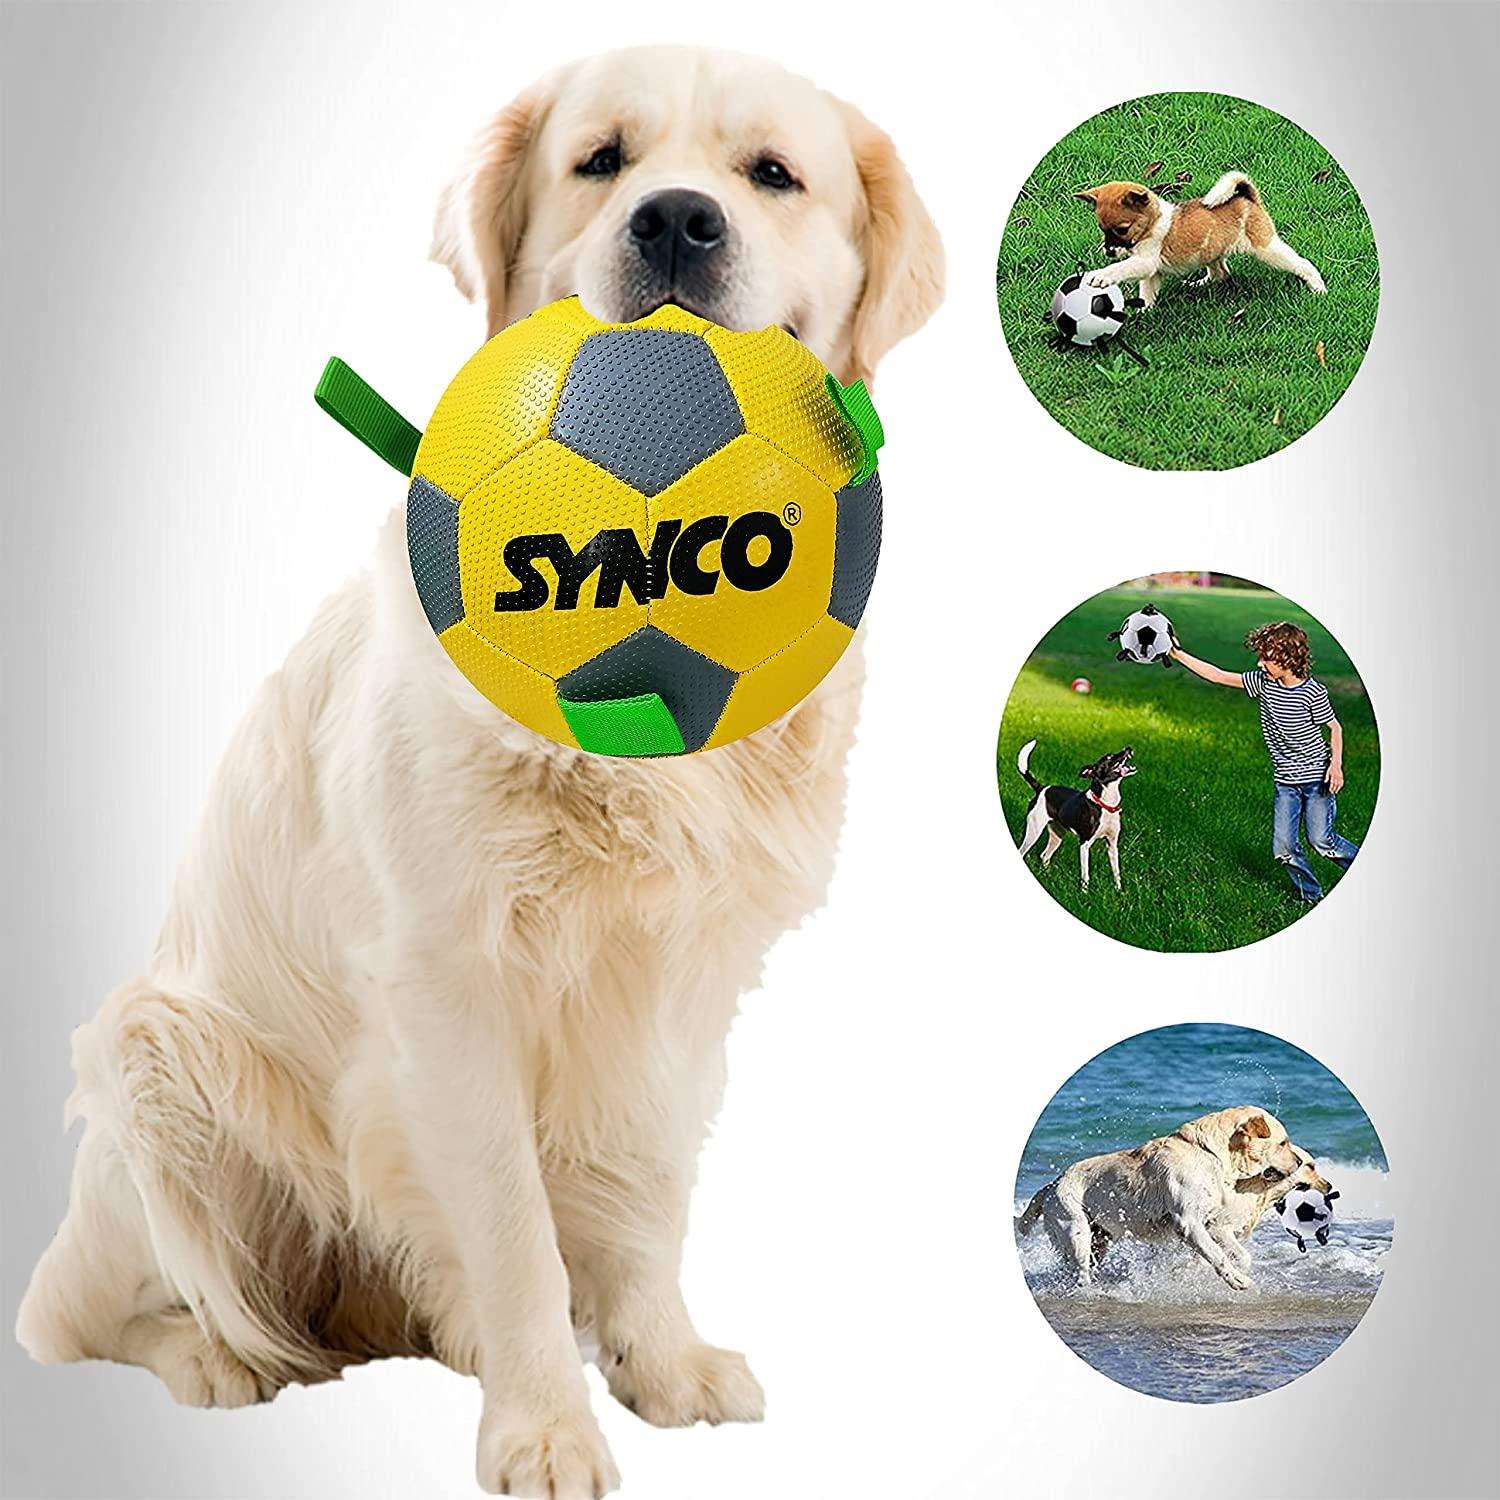 Synco Football with Holding Loops for Dogs - Size 3|Dogs Training Ball | Color- Yellow - 2